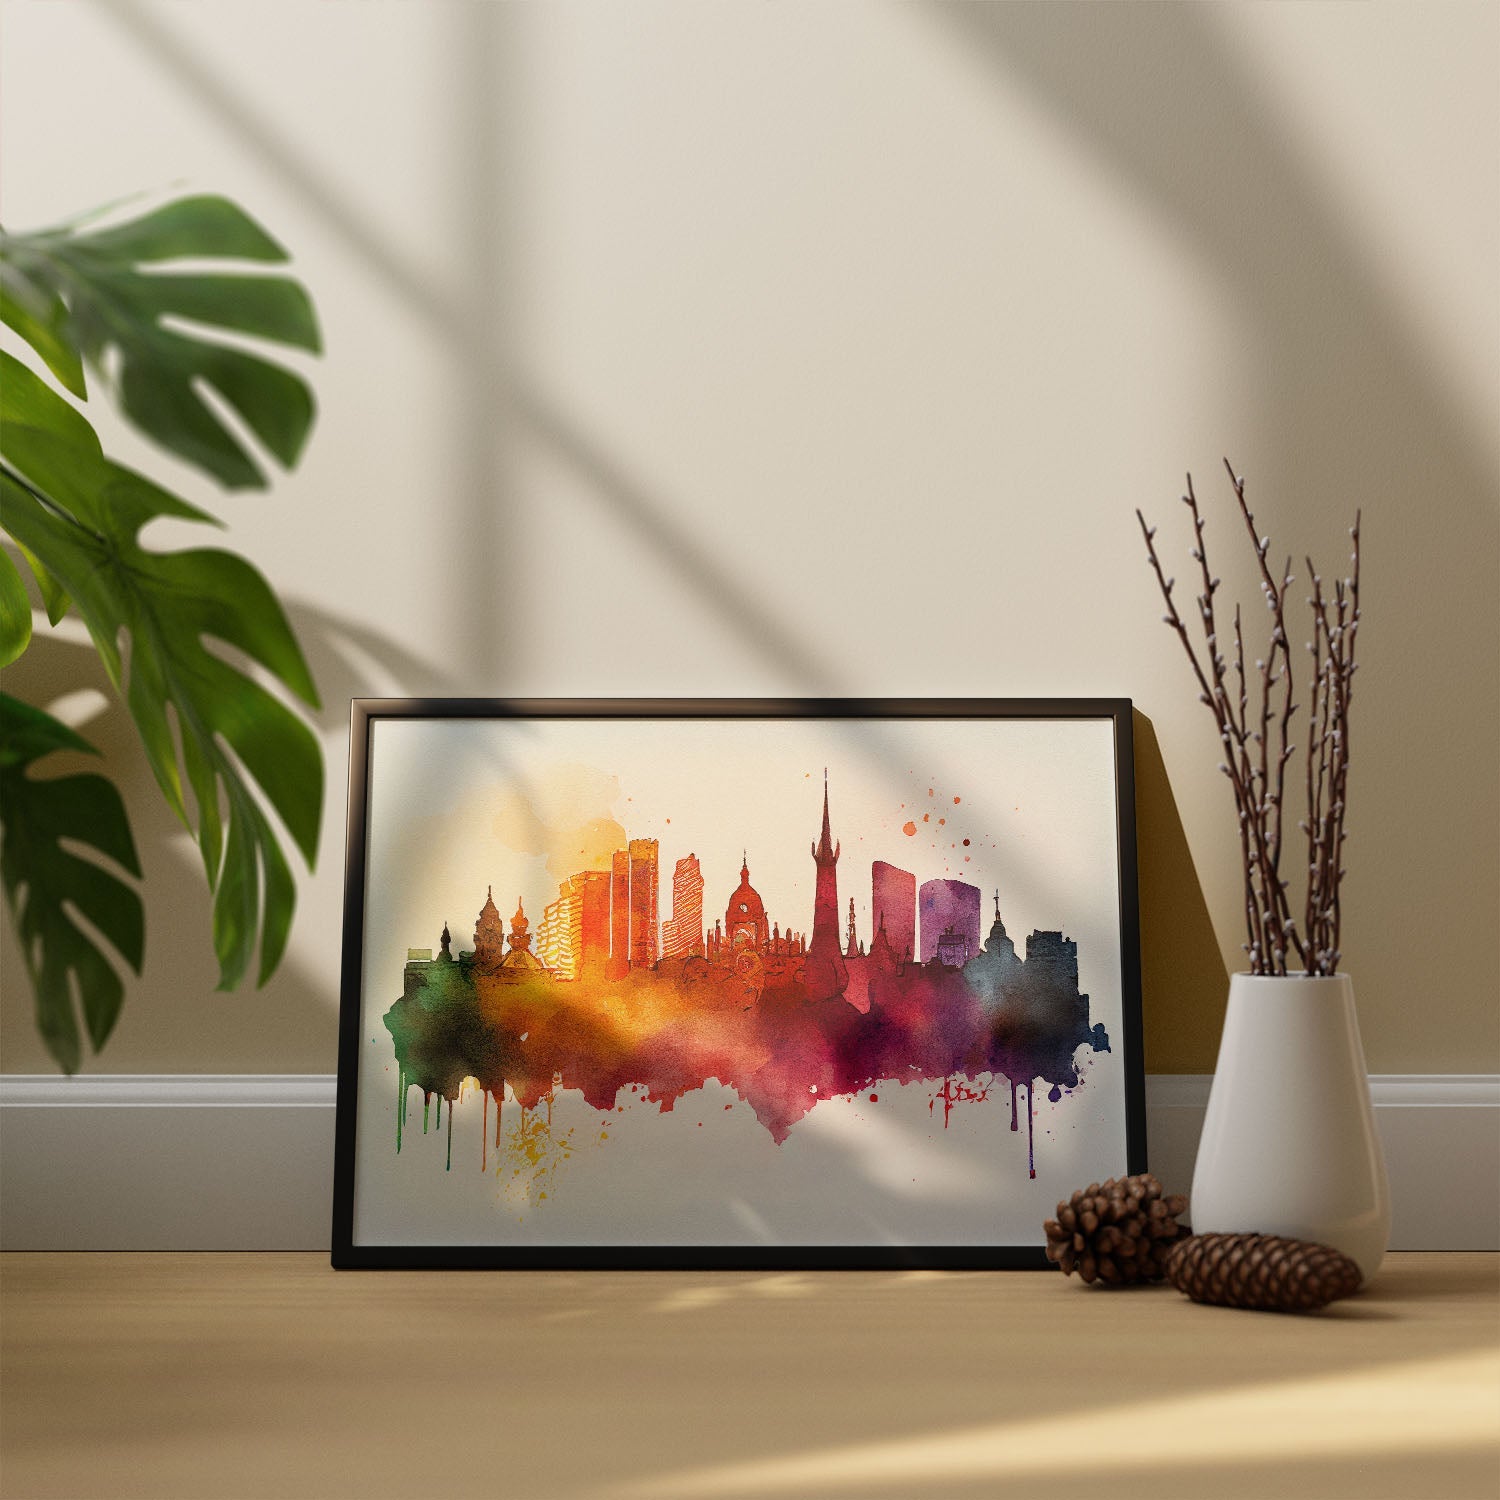 Nacnic watercolor of a skyline of the city of Madrid_2. Aesthetic Wall Art Prints for Bedroom or Living Room Design.-Artwork-Nacnic-A4-Sin Marco-Nacnic Estudio SL